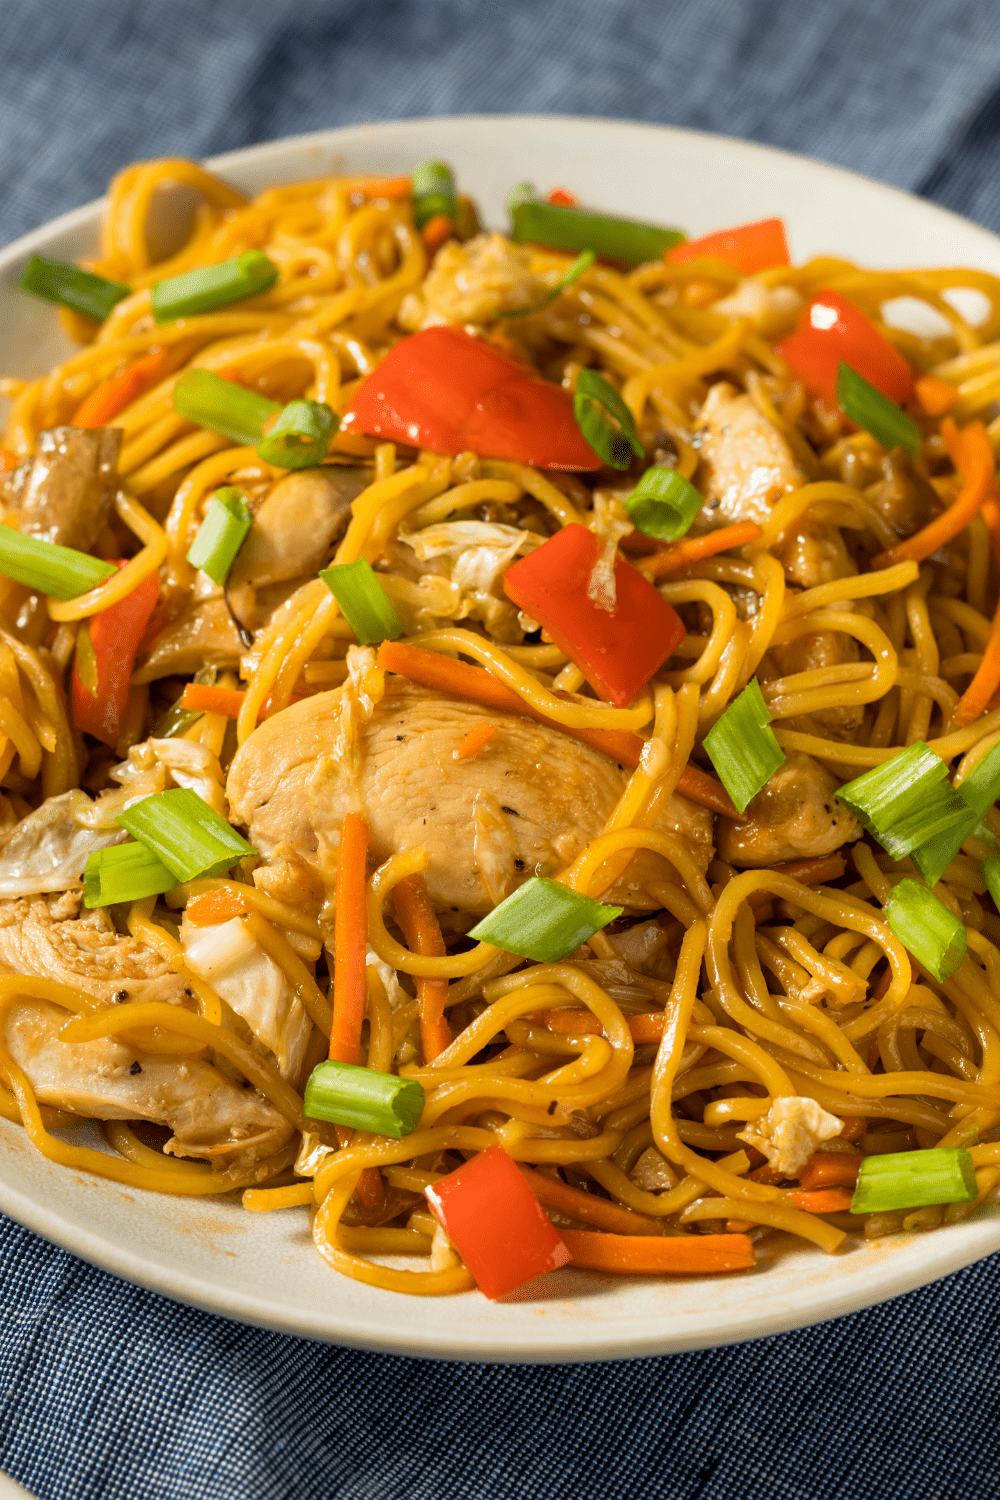 Yakisoba noodles with thick sauce to coat the noodles, chicken, and veggies served on a plate.